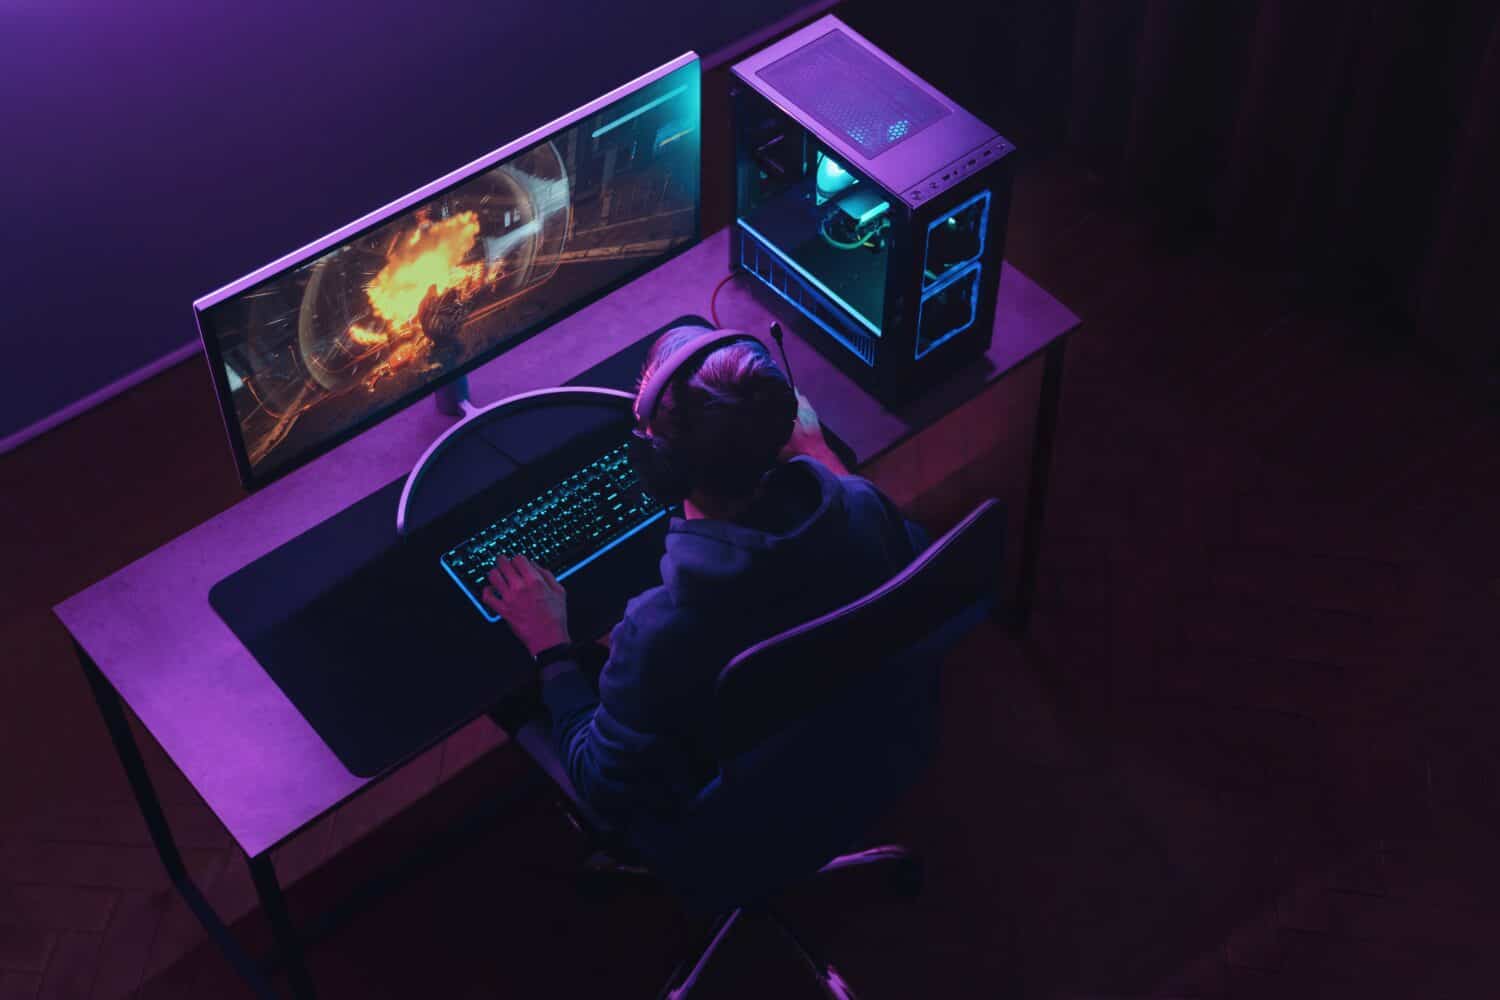 Top view of professional cyber sportsman in headphones playing shooter video game on his powerful gaming PC in dark neon room at night. Pro gamer participates in online esport tournament. Cyber sport